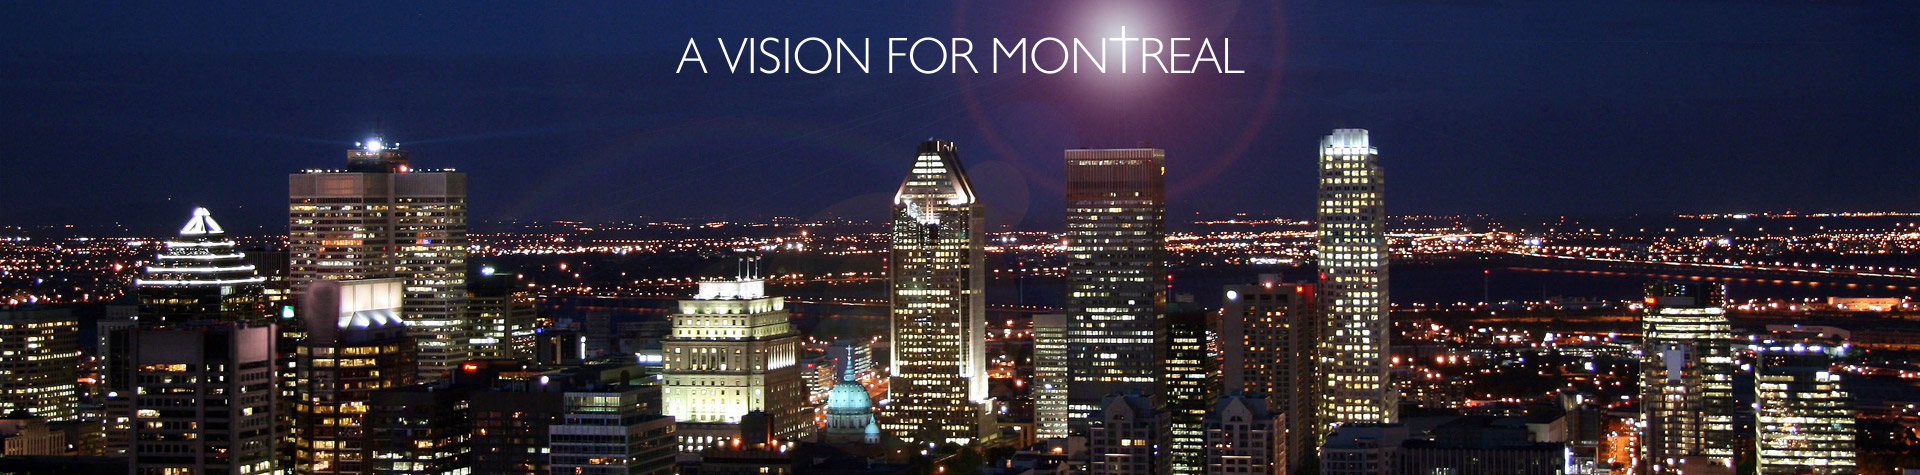 A Vision for Montreal